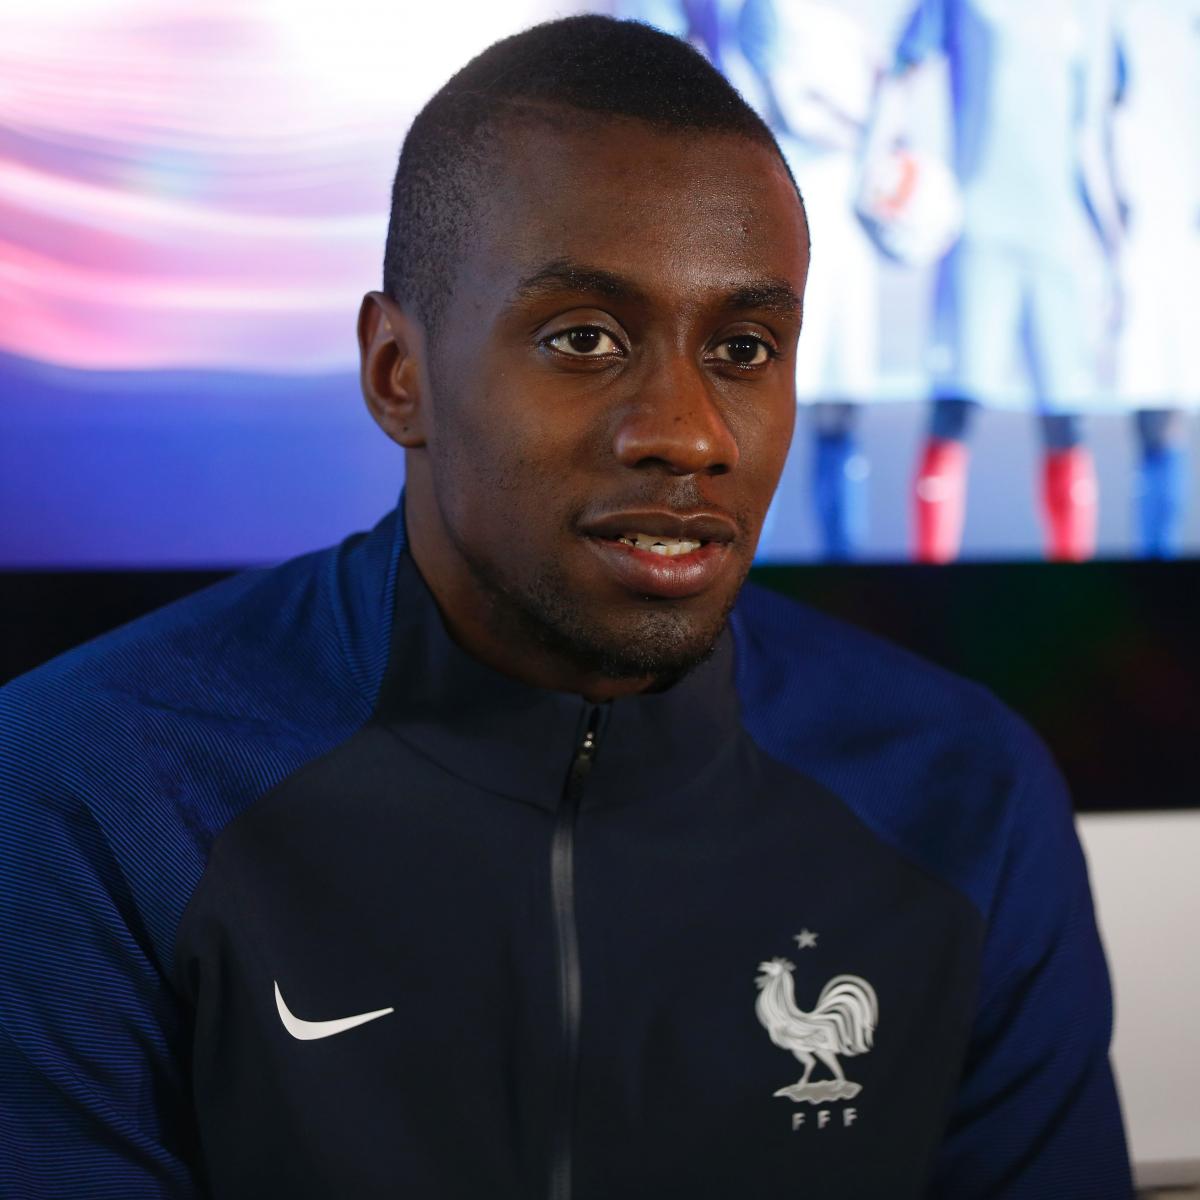 Blaise Matuidi Transfers to Juventus from PSG, Agrees to 3-Year Contract | Bleacher ...